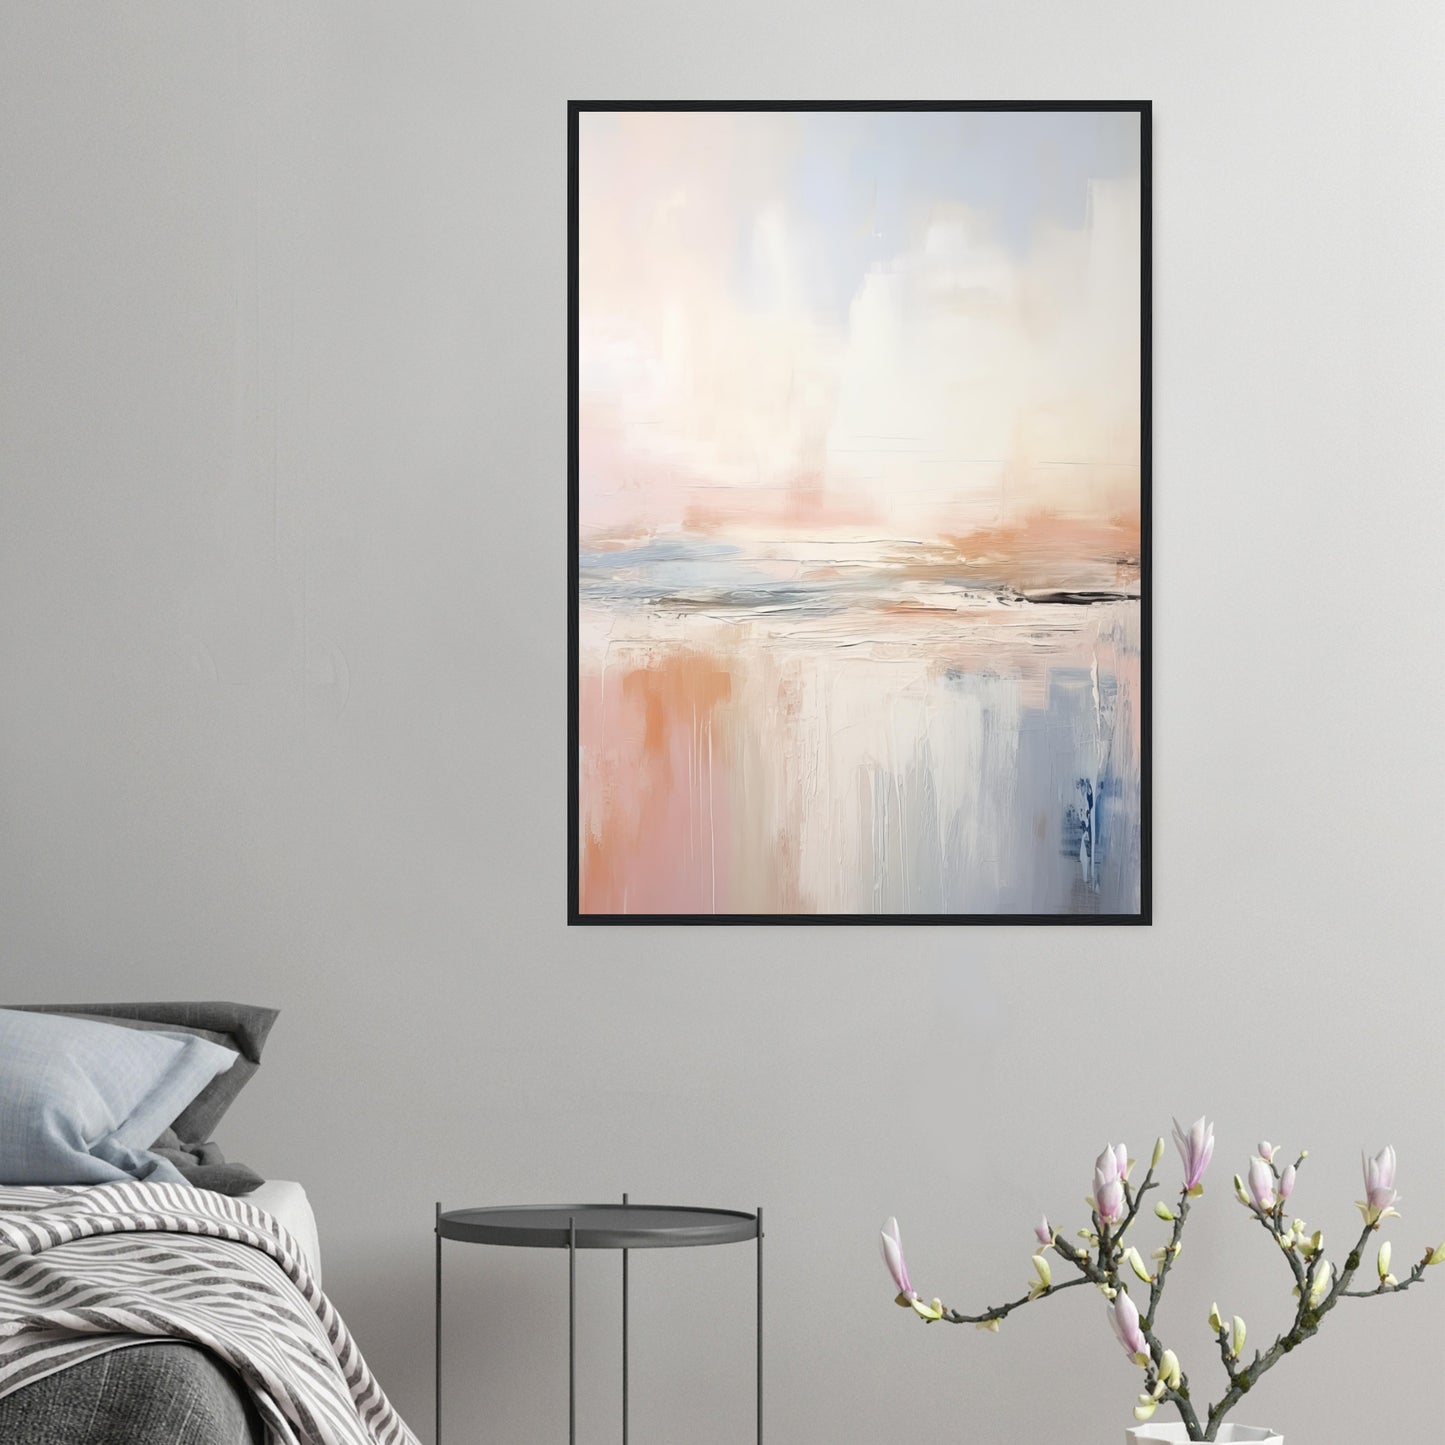 Those That I Can't See - Abstract Wall Art Print Pastel Hues of Pink, Blue, Cream